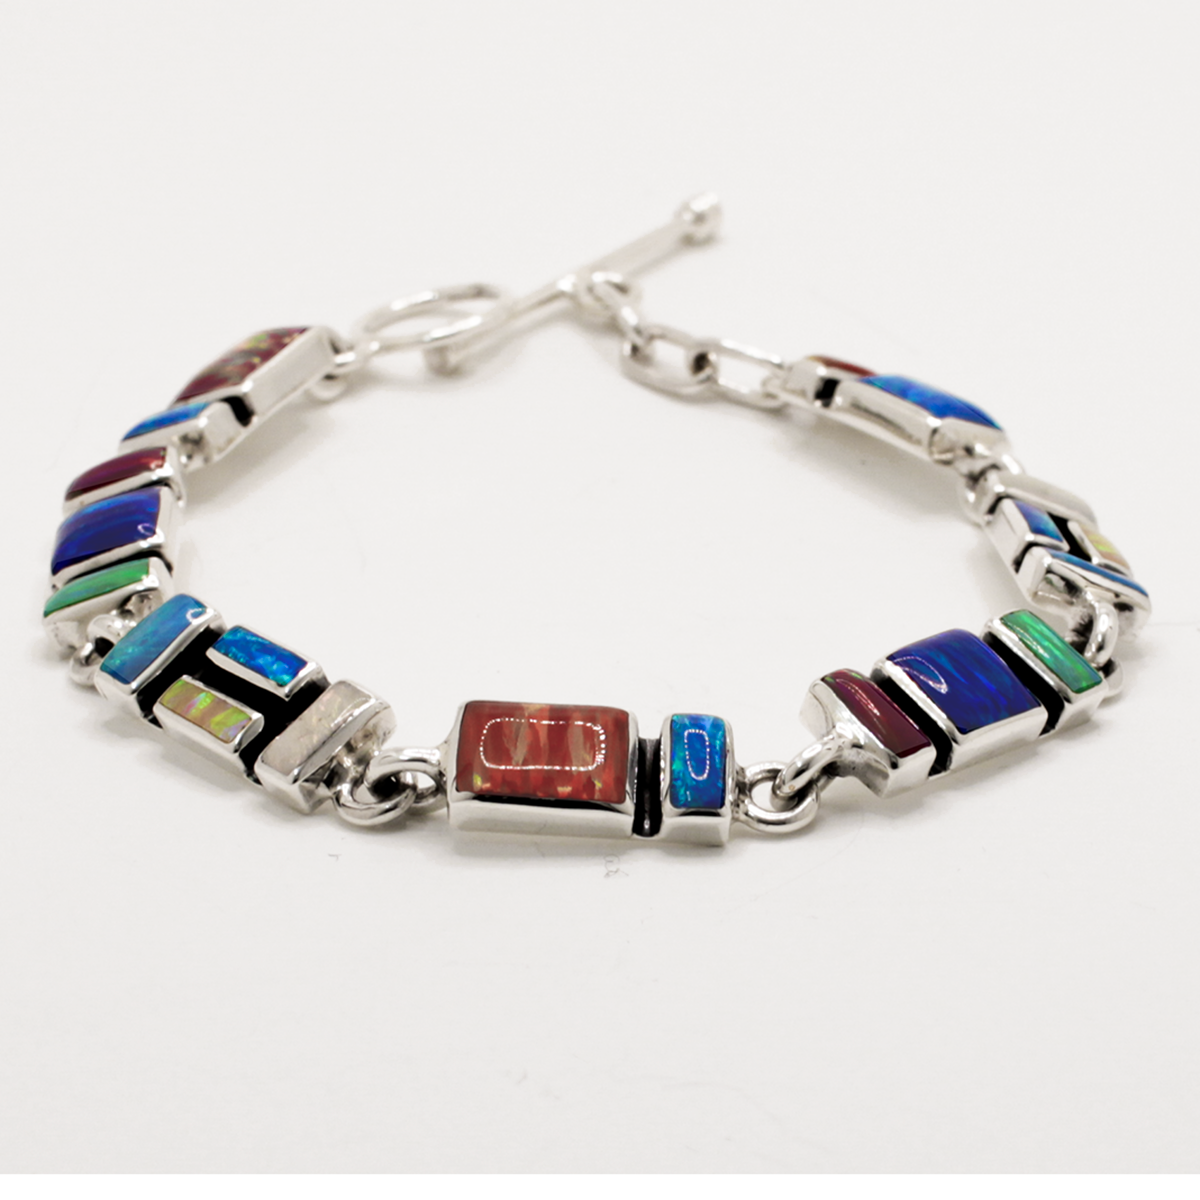 Add a vibrant pop of colour to your style with the Sleveen bracelet. Seven colorful rectangle opalescent pieces display a mesmerizing mosaic, measuring 7mm in width and 3mm deep. This bracelet is finished with a toggle clasp and measures 19cm in length, crafted in .925 silver and featuring colored resins inspired by the beautiful houses of Kinsa